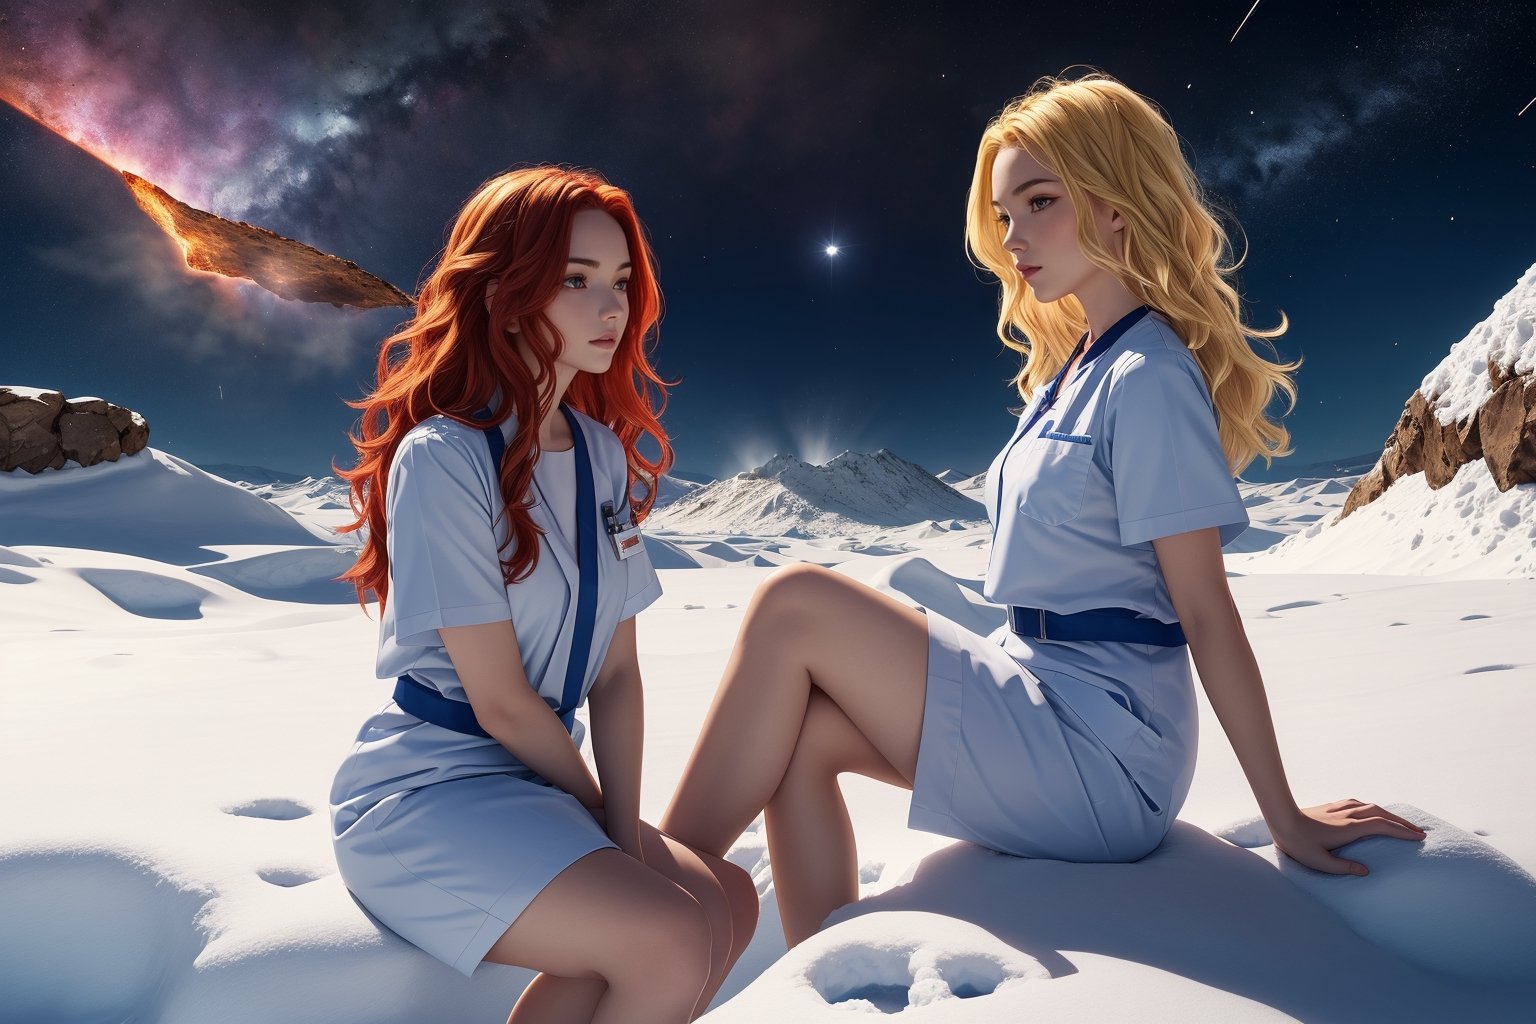 in a large meteorite crater, which is half covered by heavy snowdrifts in summer, two beautiful girls (one with short blond hair, the other with long red hair) ,wearing hospital nurse uniform, Sitting opposite each other